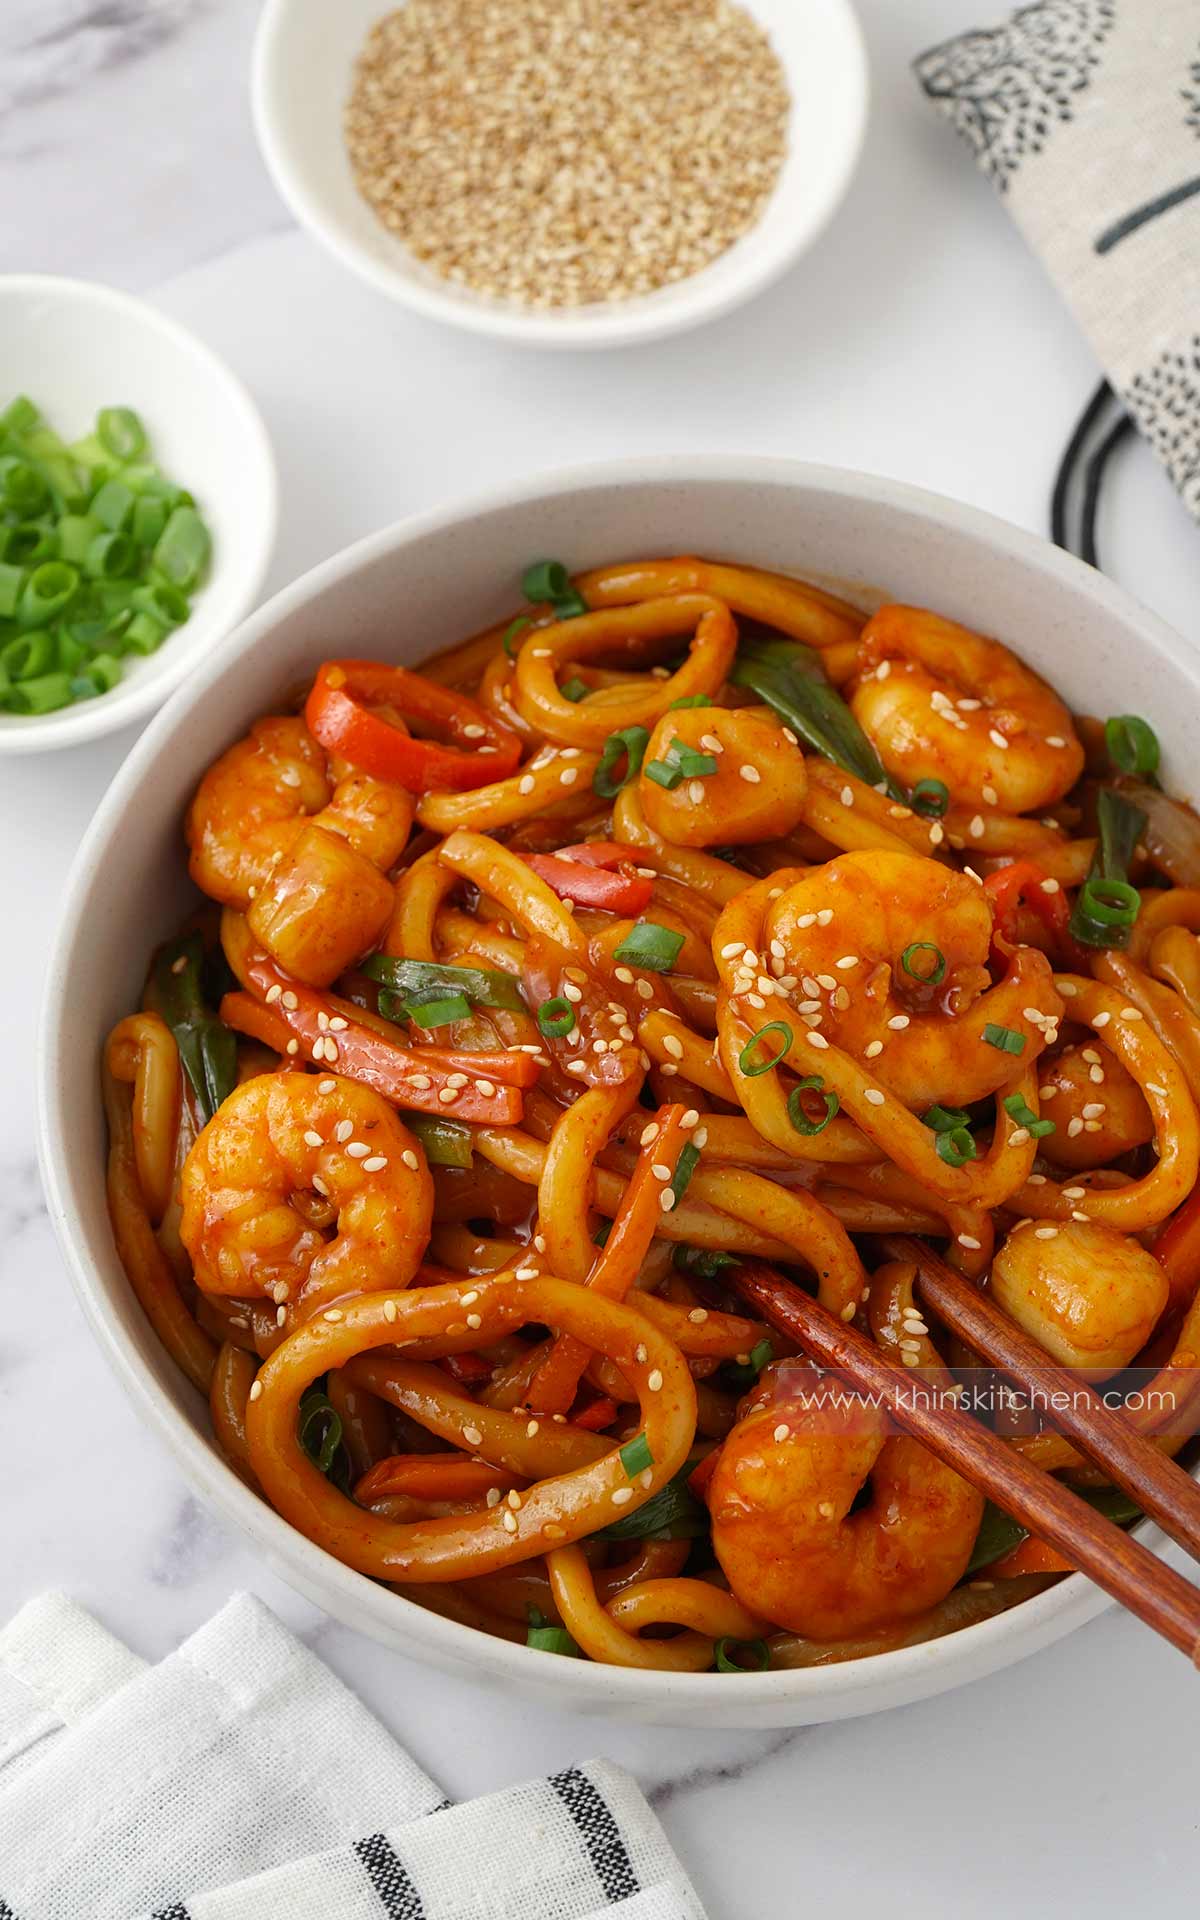 A white bowl containing stir fried udon noodles, prawns, squid rings, scallops, and red chilli slices. Spring onions and sesame seeds on the top.